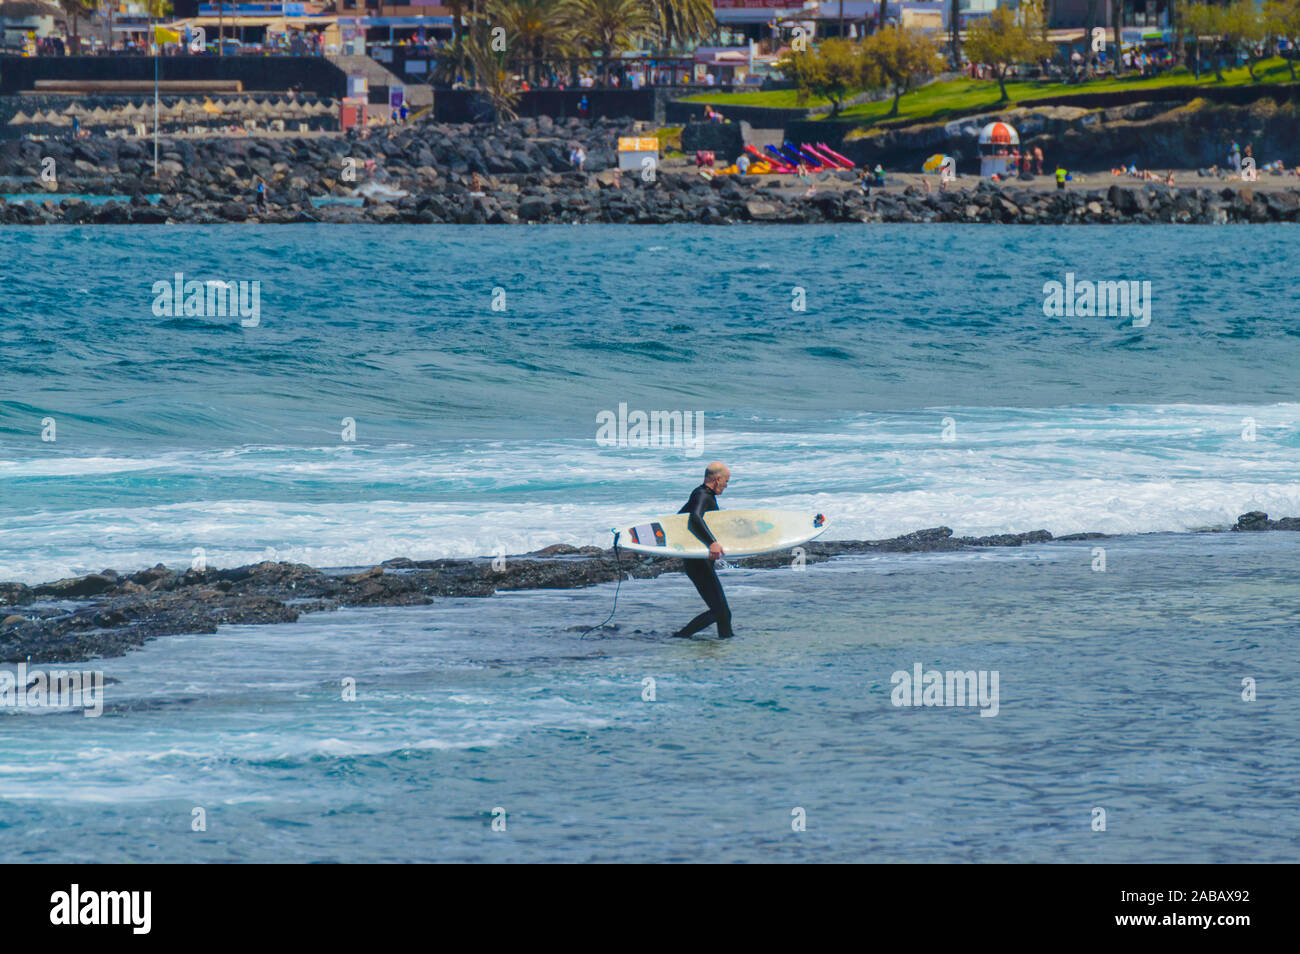 Bald Senior Man Holding A White Table leaving the Atlantic Ocean after enjoying a day of waves on the beach of Las Americas. April 11, 2019. Santa Cru Stock Photo